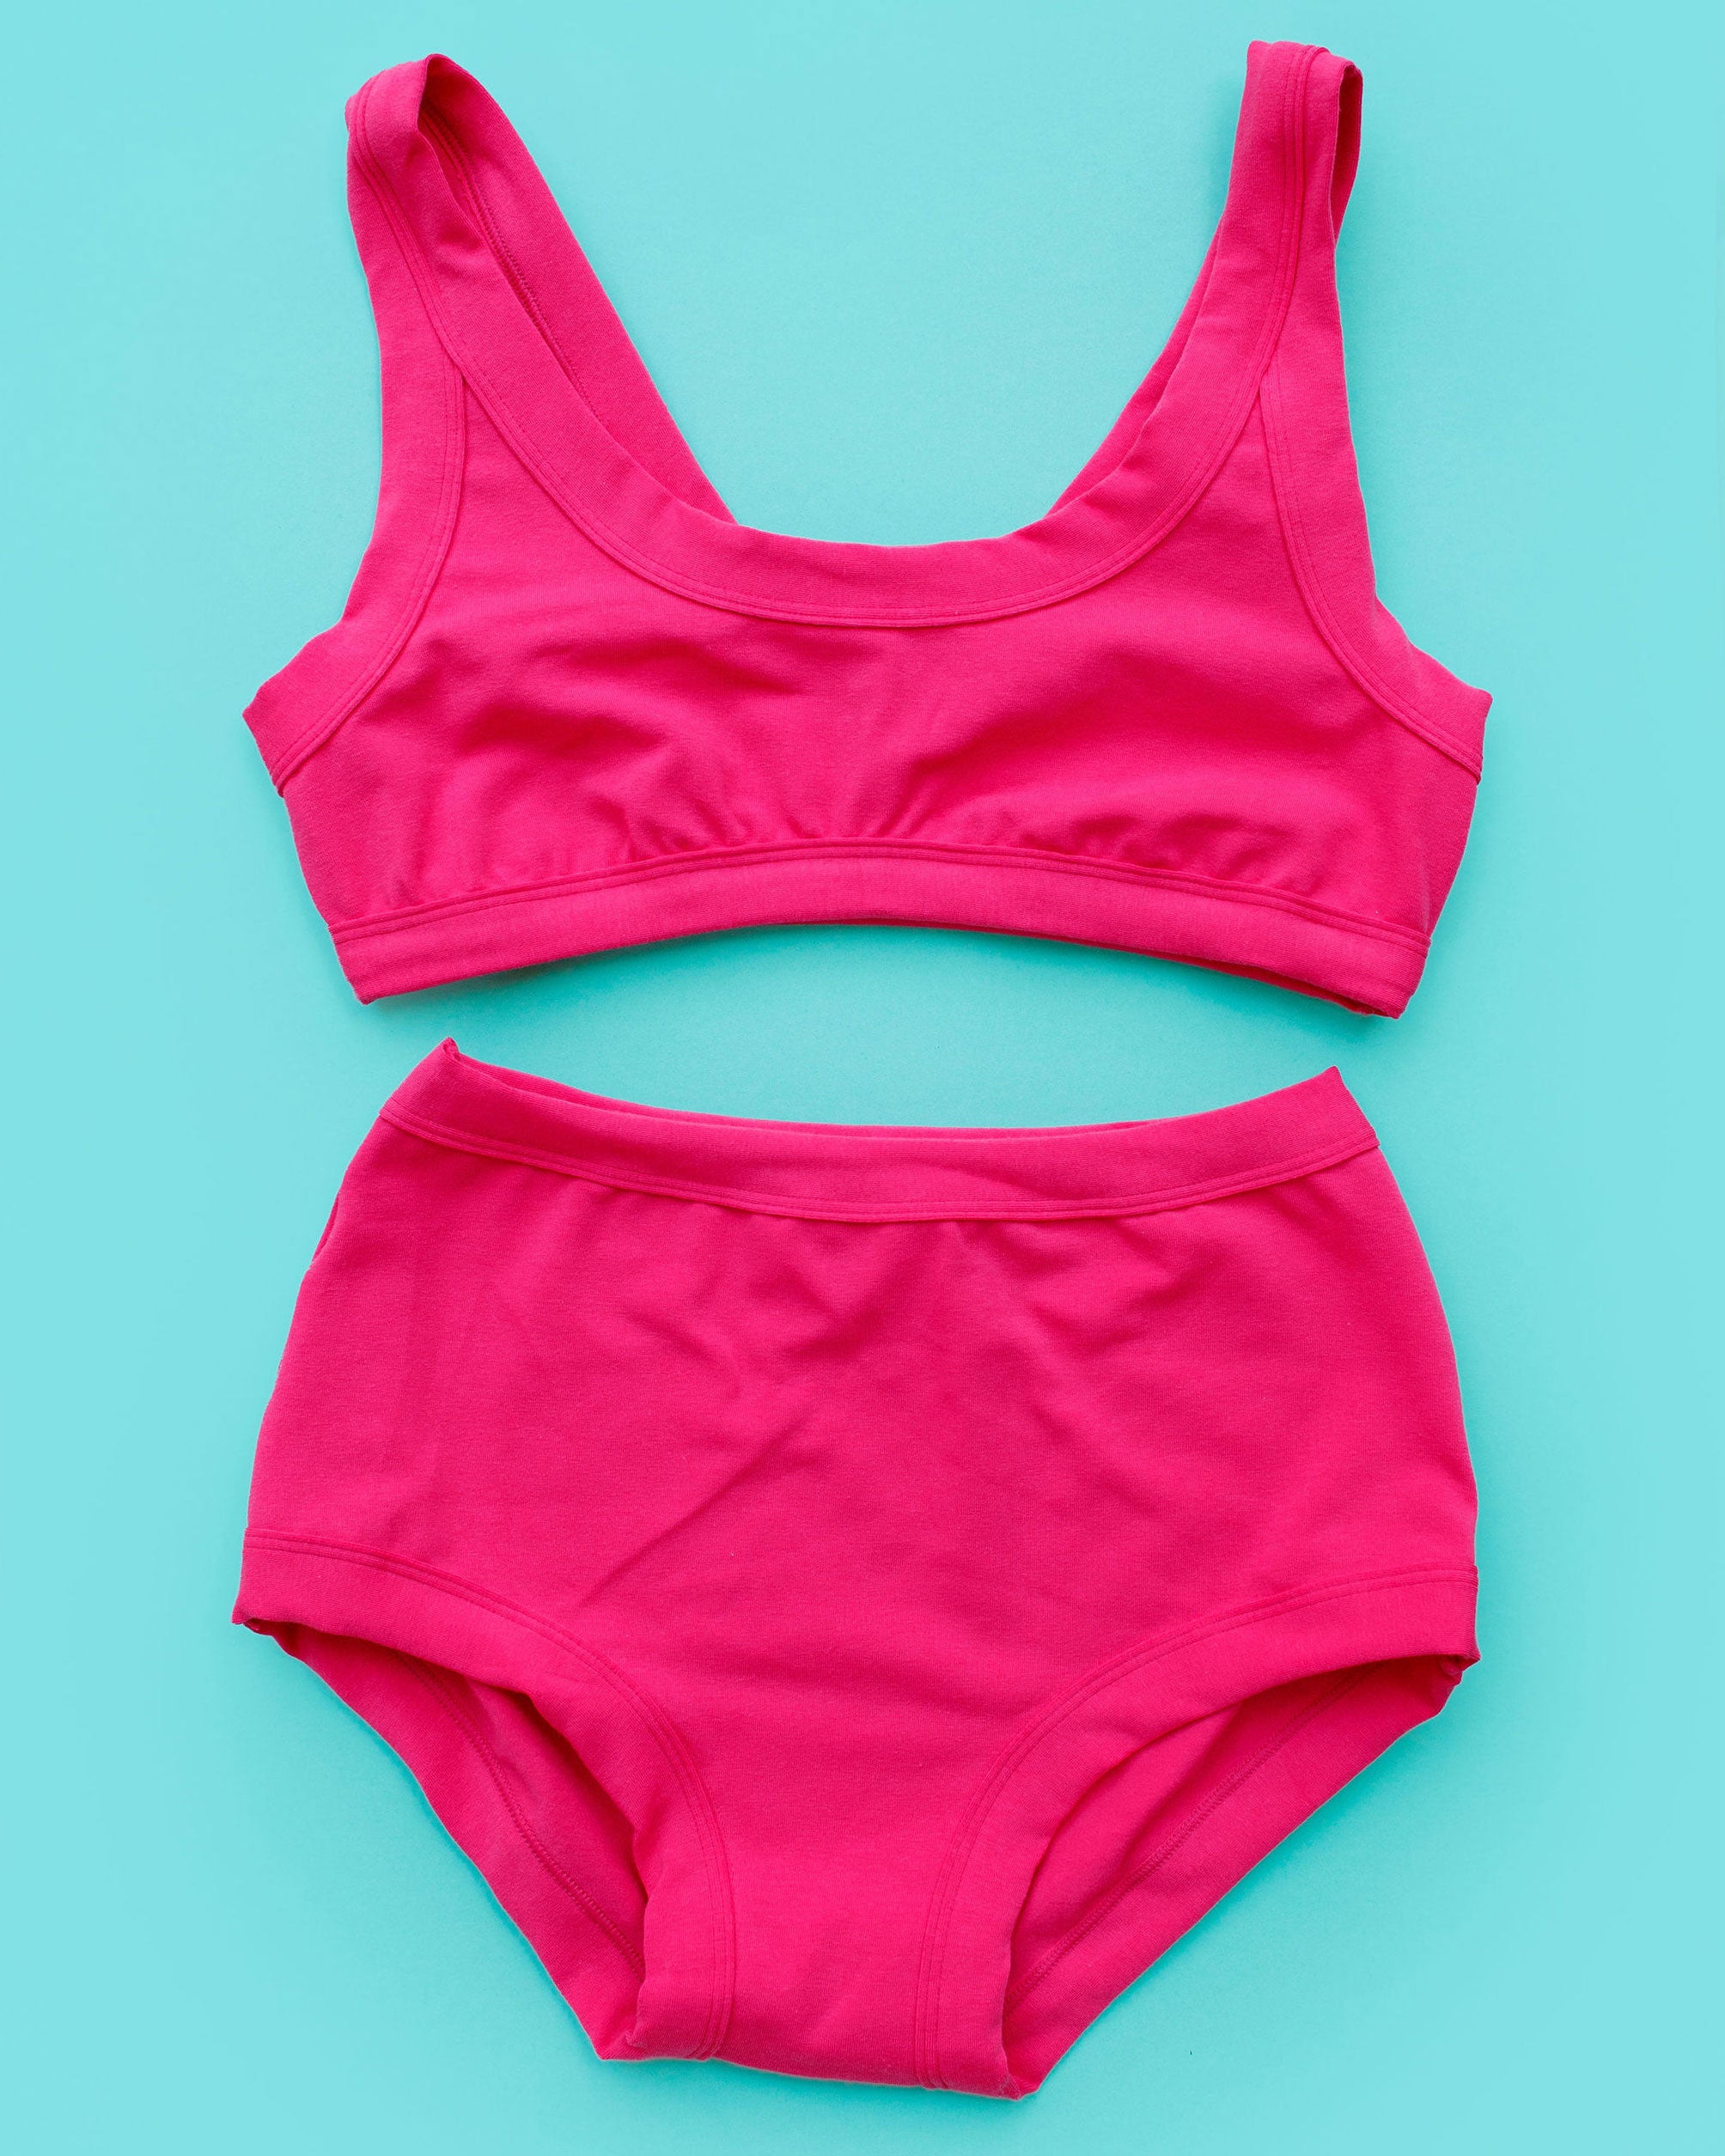 Flat lay of Thunderpants Bralette and Original style underwear in a hot pink color.